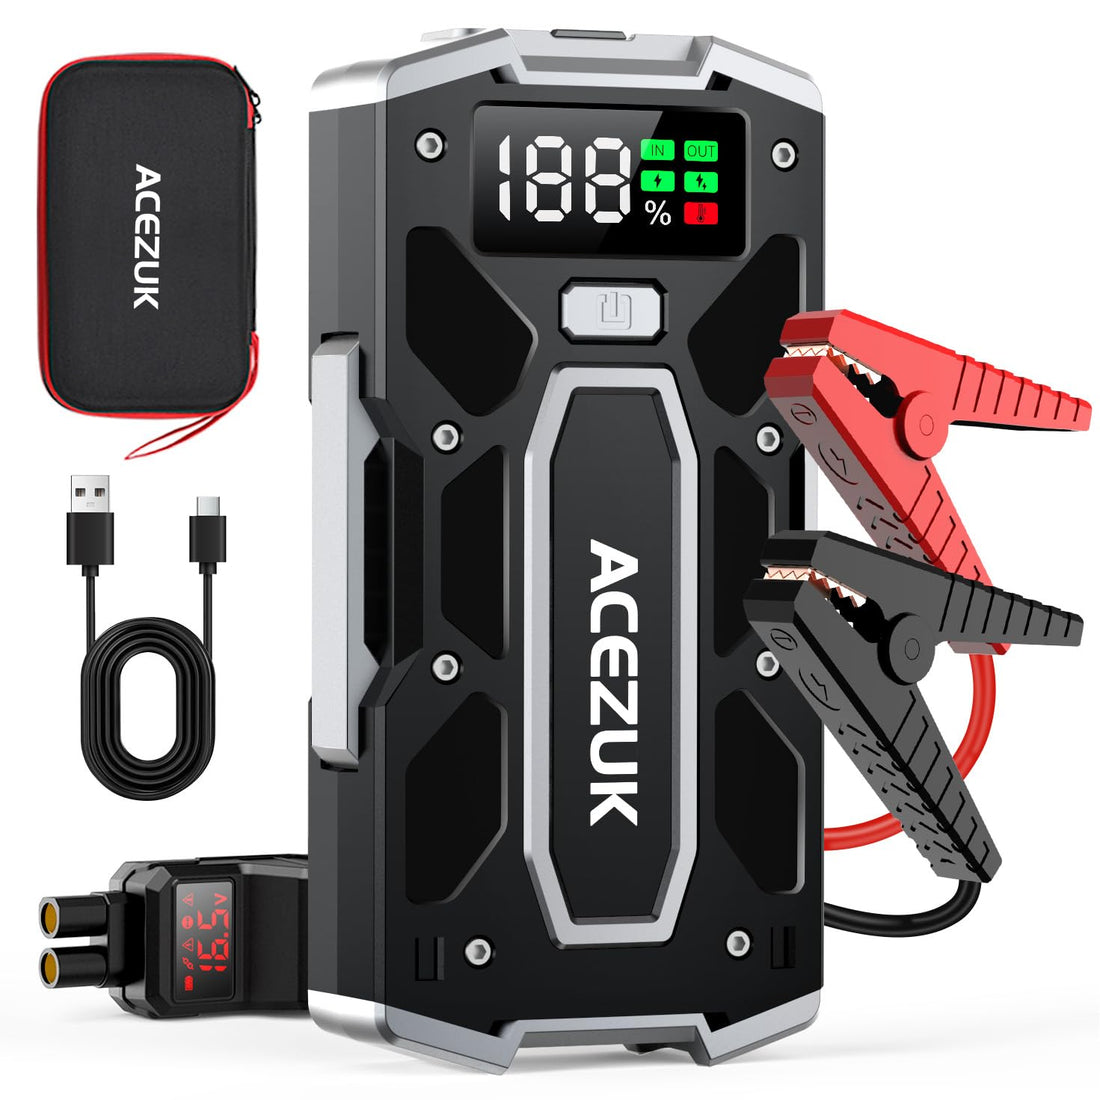 ACEZUK Car Battery Jump Starter 5000A Jump Box (10.0L Gas/8.0L Diesel), Portable Car Starter Battery Pack with Extended Smart Jumper Cables, Quick Charge, Large Display, Lights